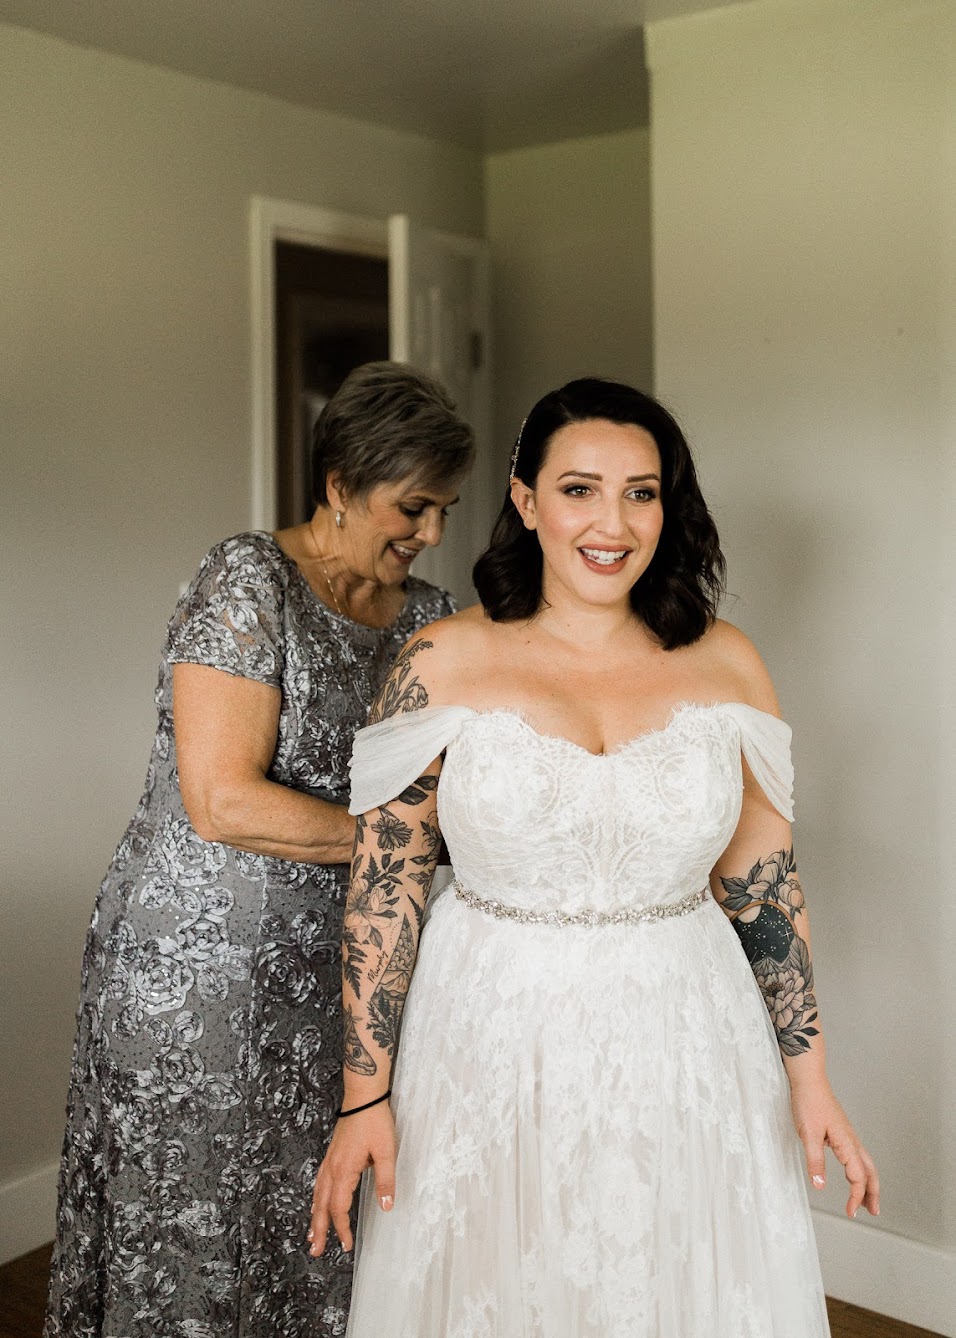 Mother of the bride helping the bride get into her dress. The bride has floral tattoos on both her arms